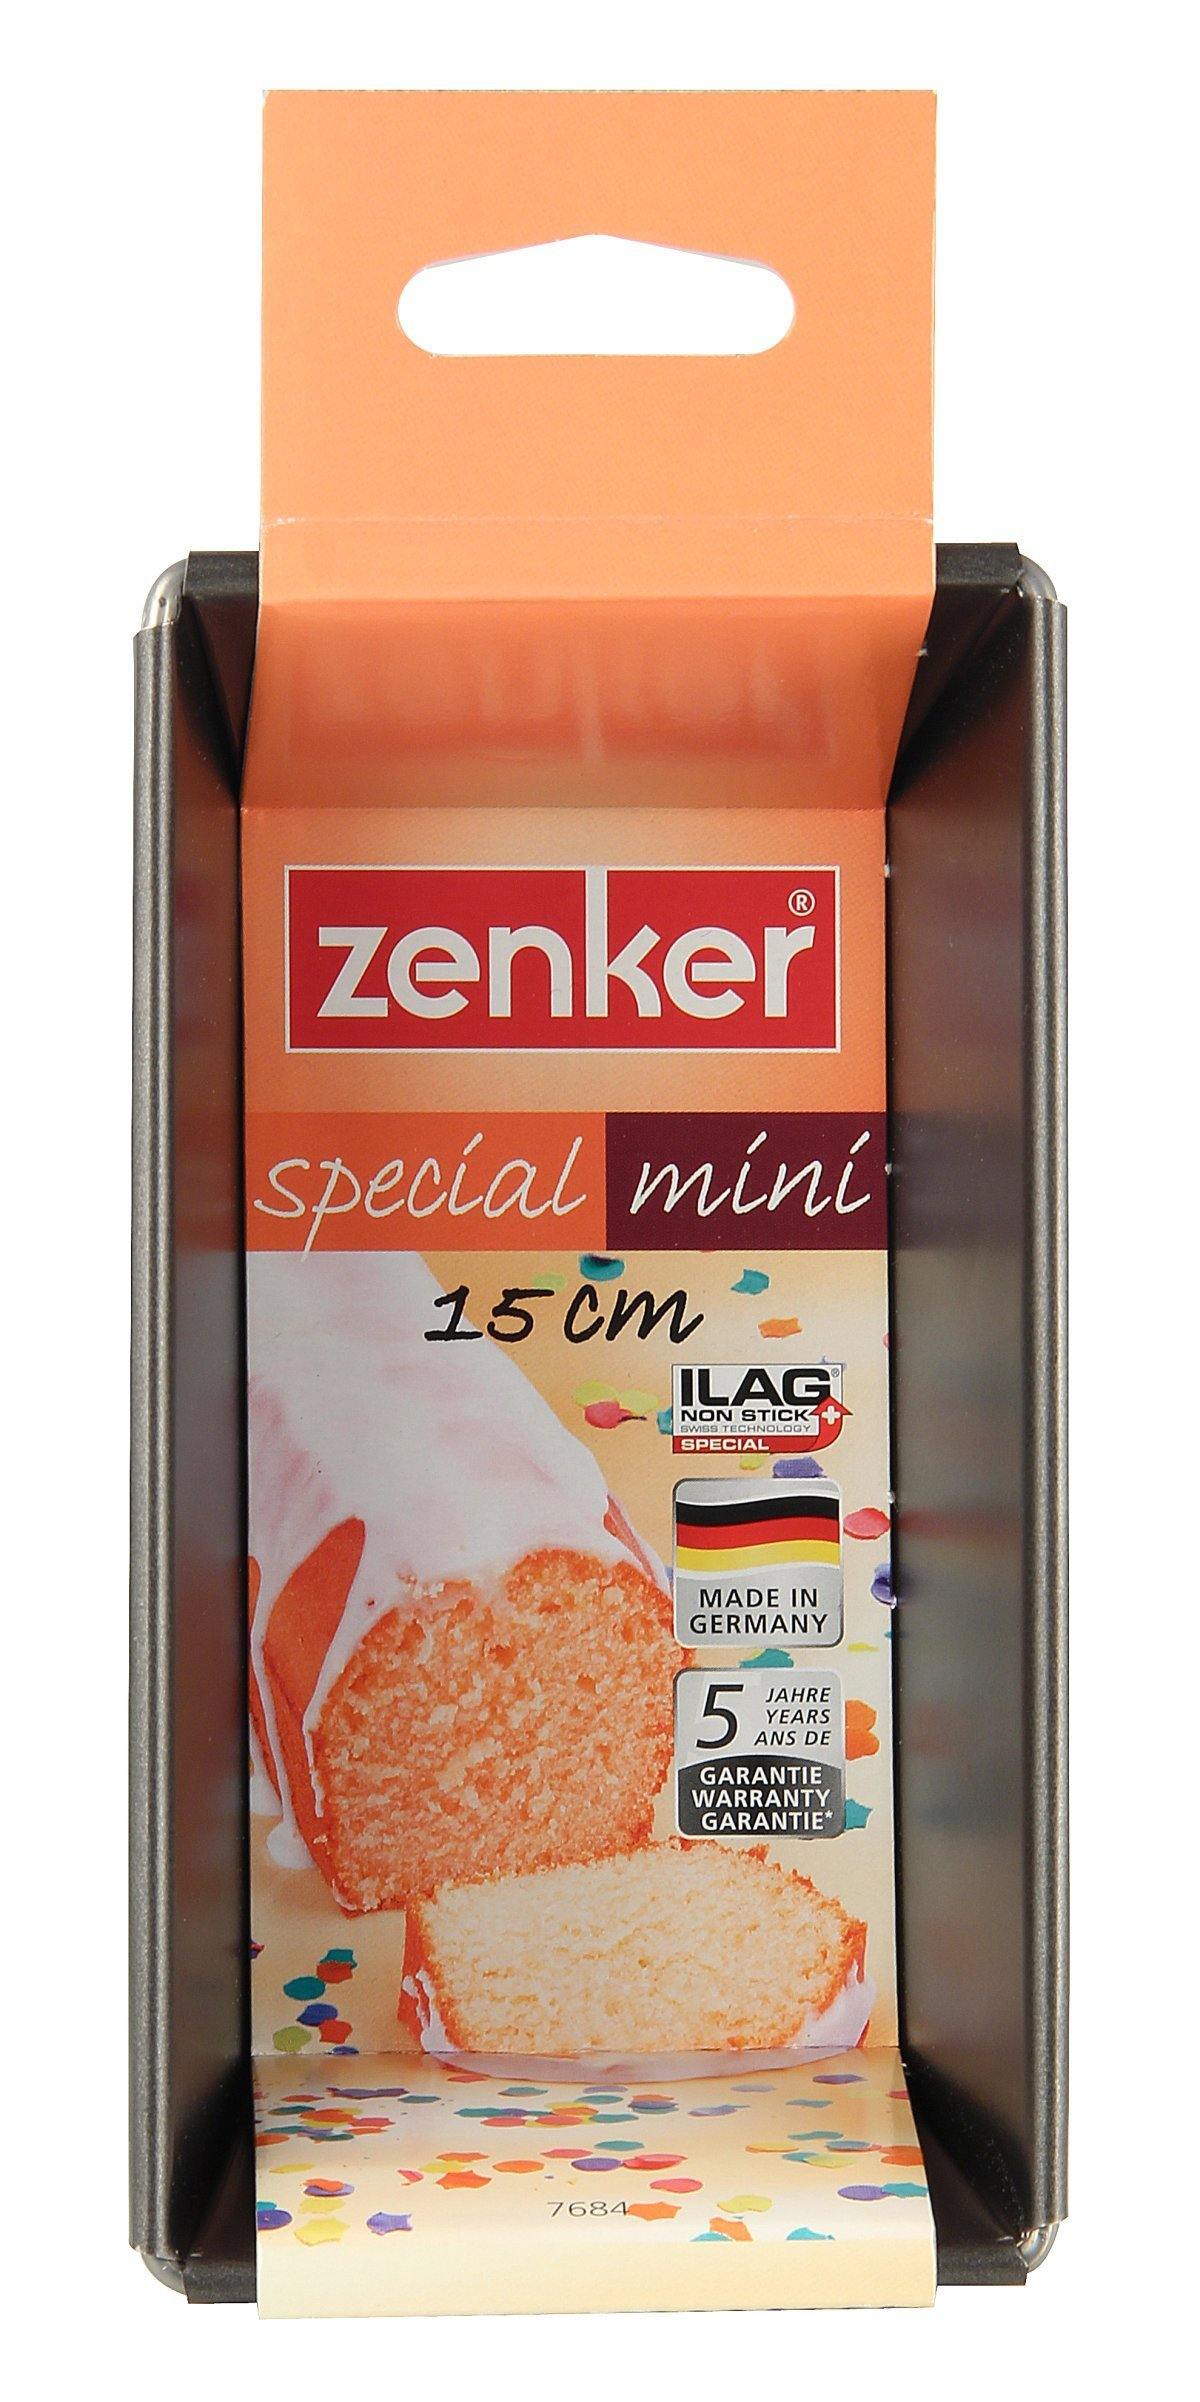 Zenker  "Special Mini" Baking Tin, Black, 16X8.5X5.5 cm - Whole and All